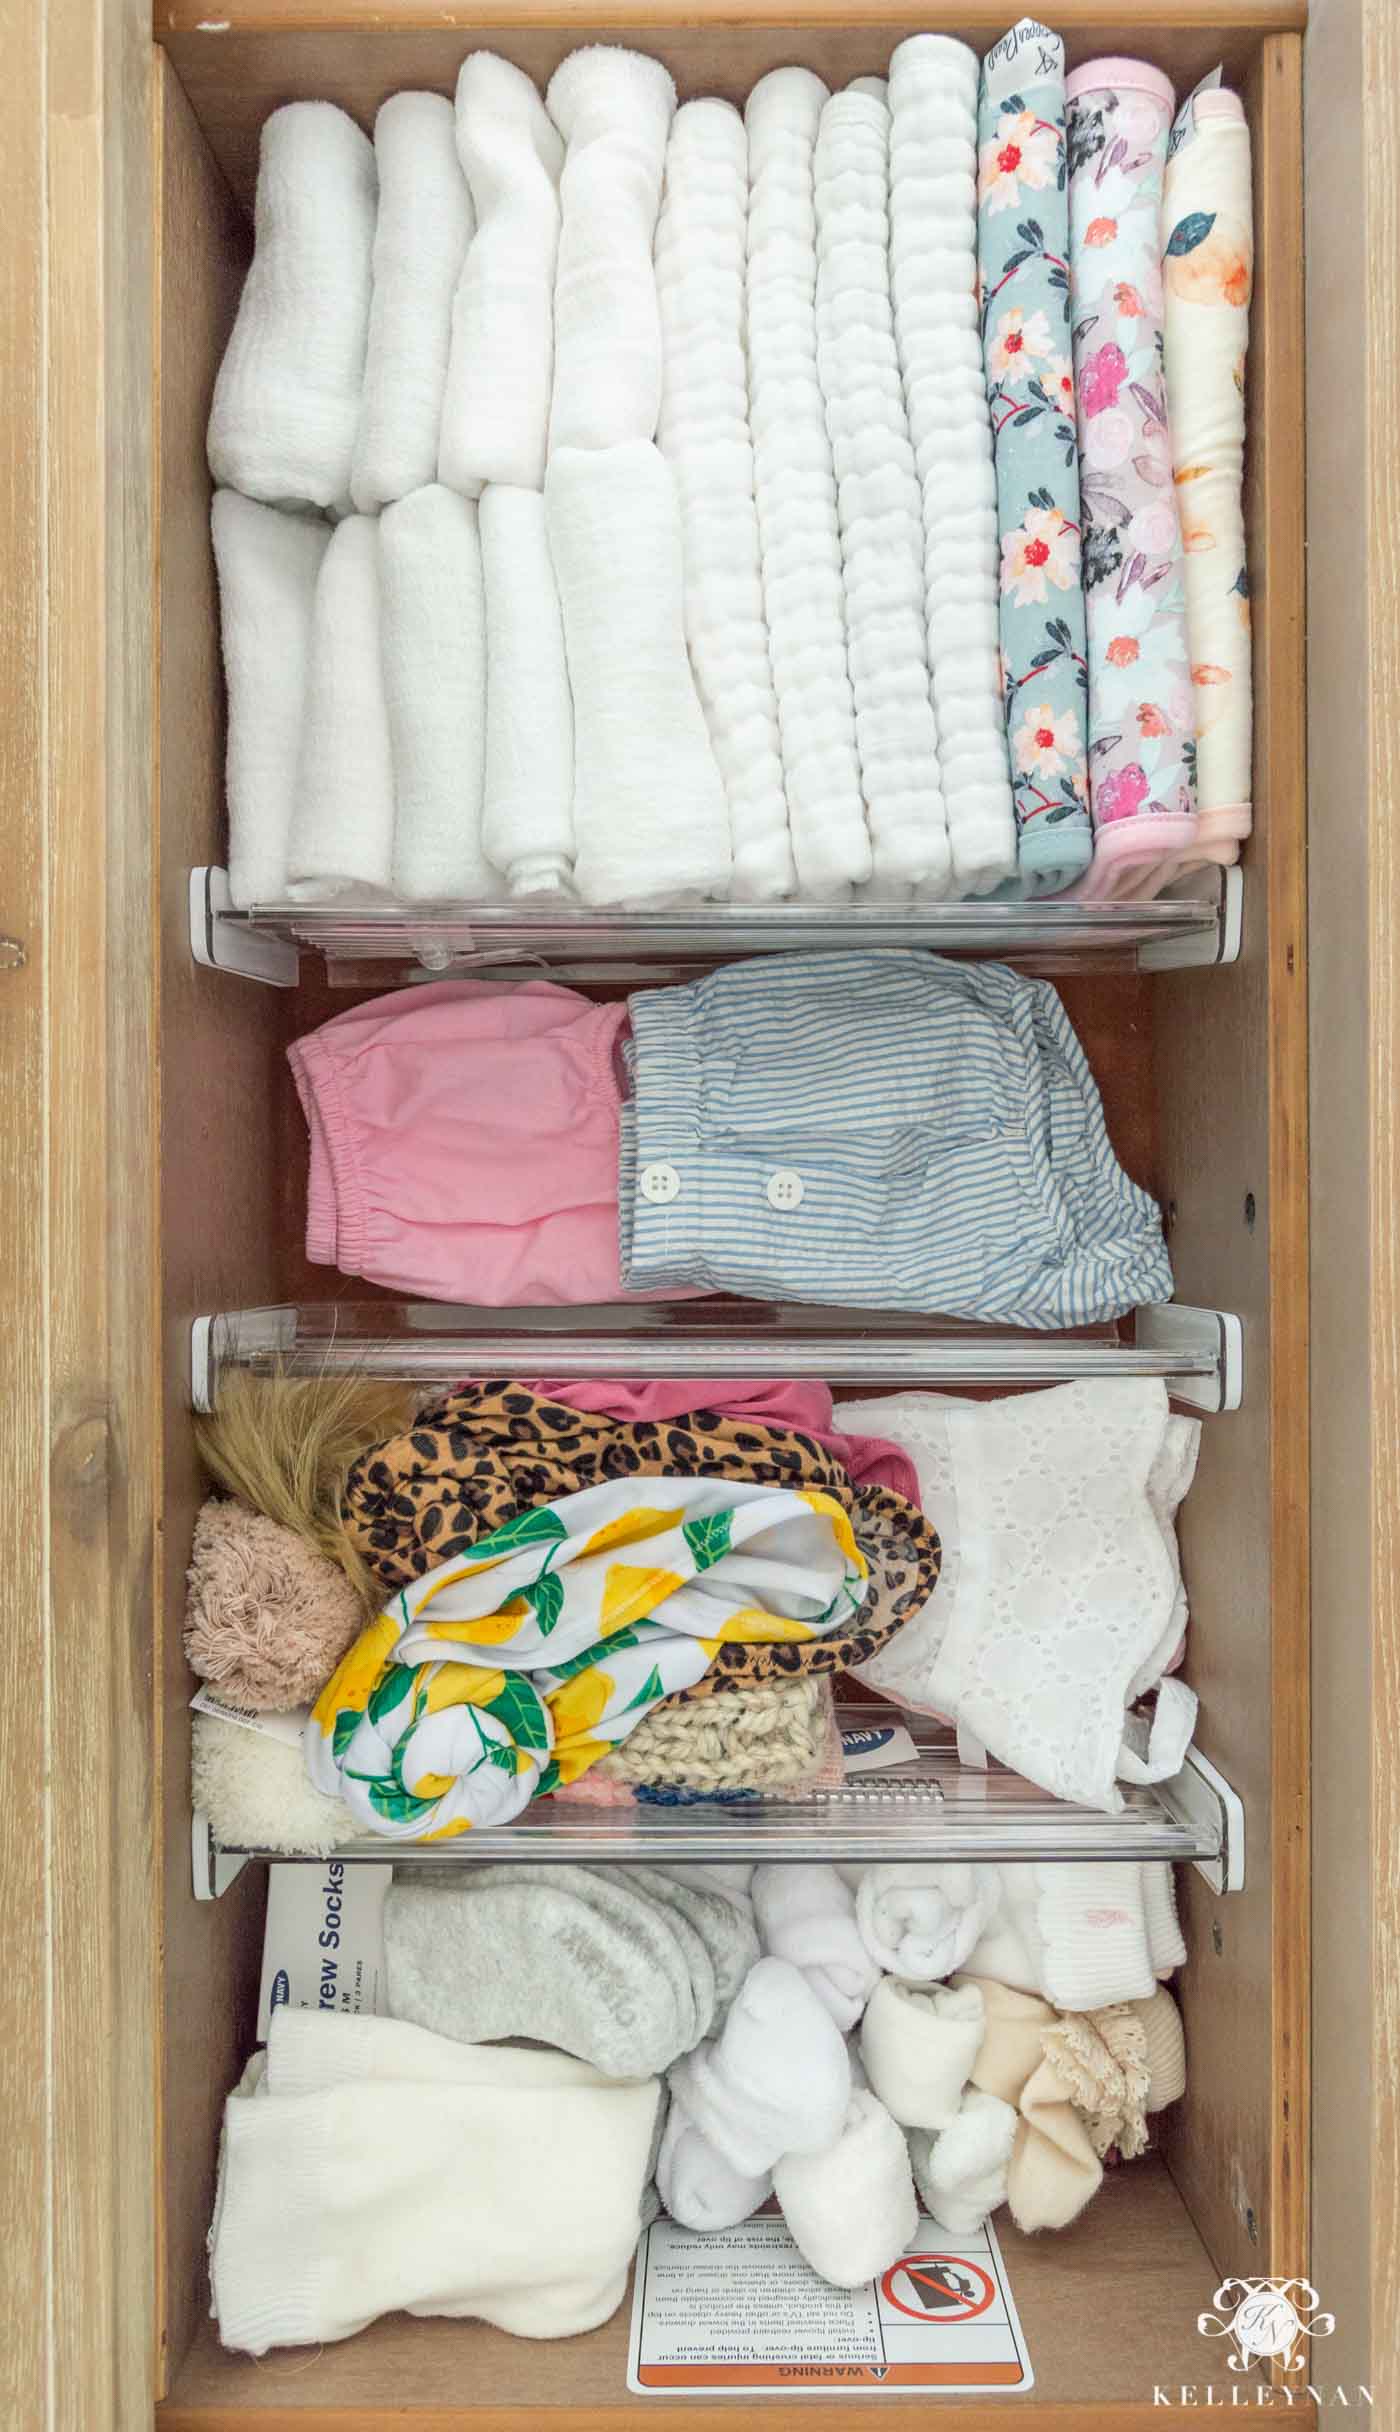 Nursery Dresser Organization Tried, How To Organize Baby Clothes Without Dresser